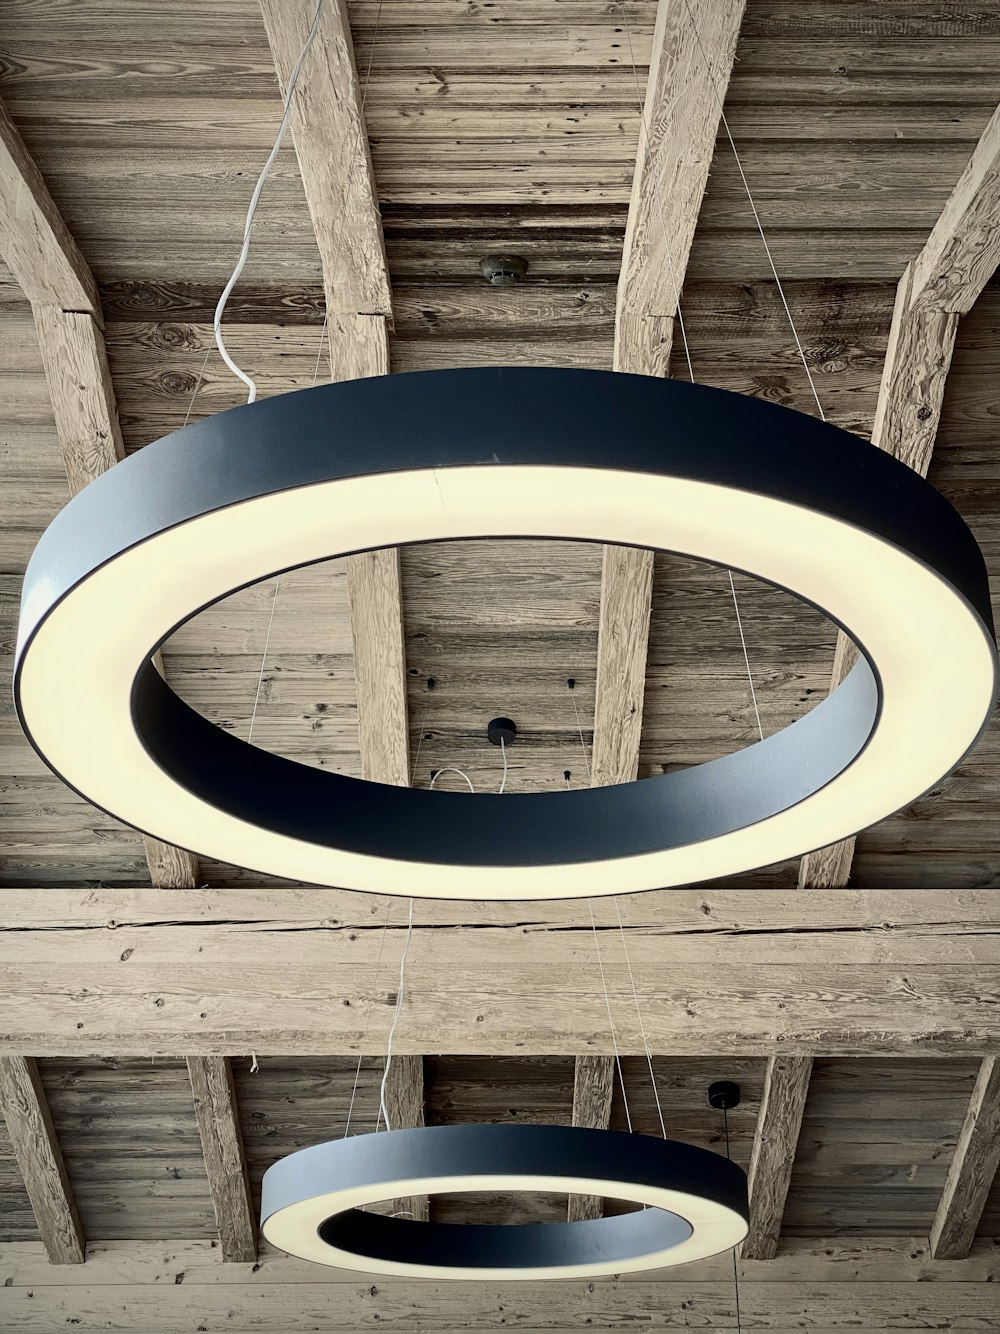 a circular light fixture hanging from a wooden ceiling